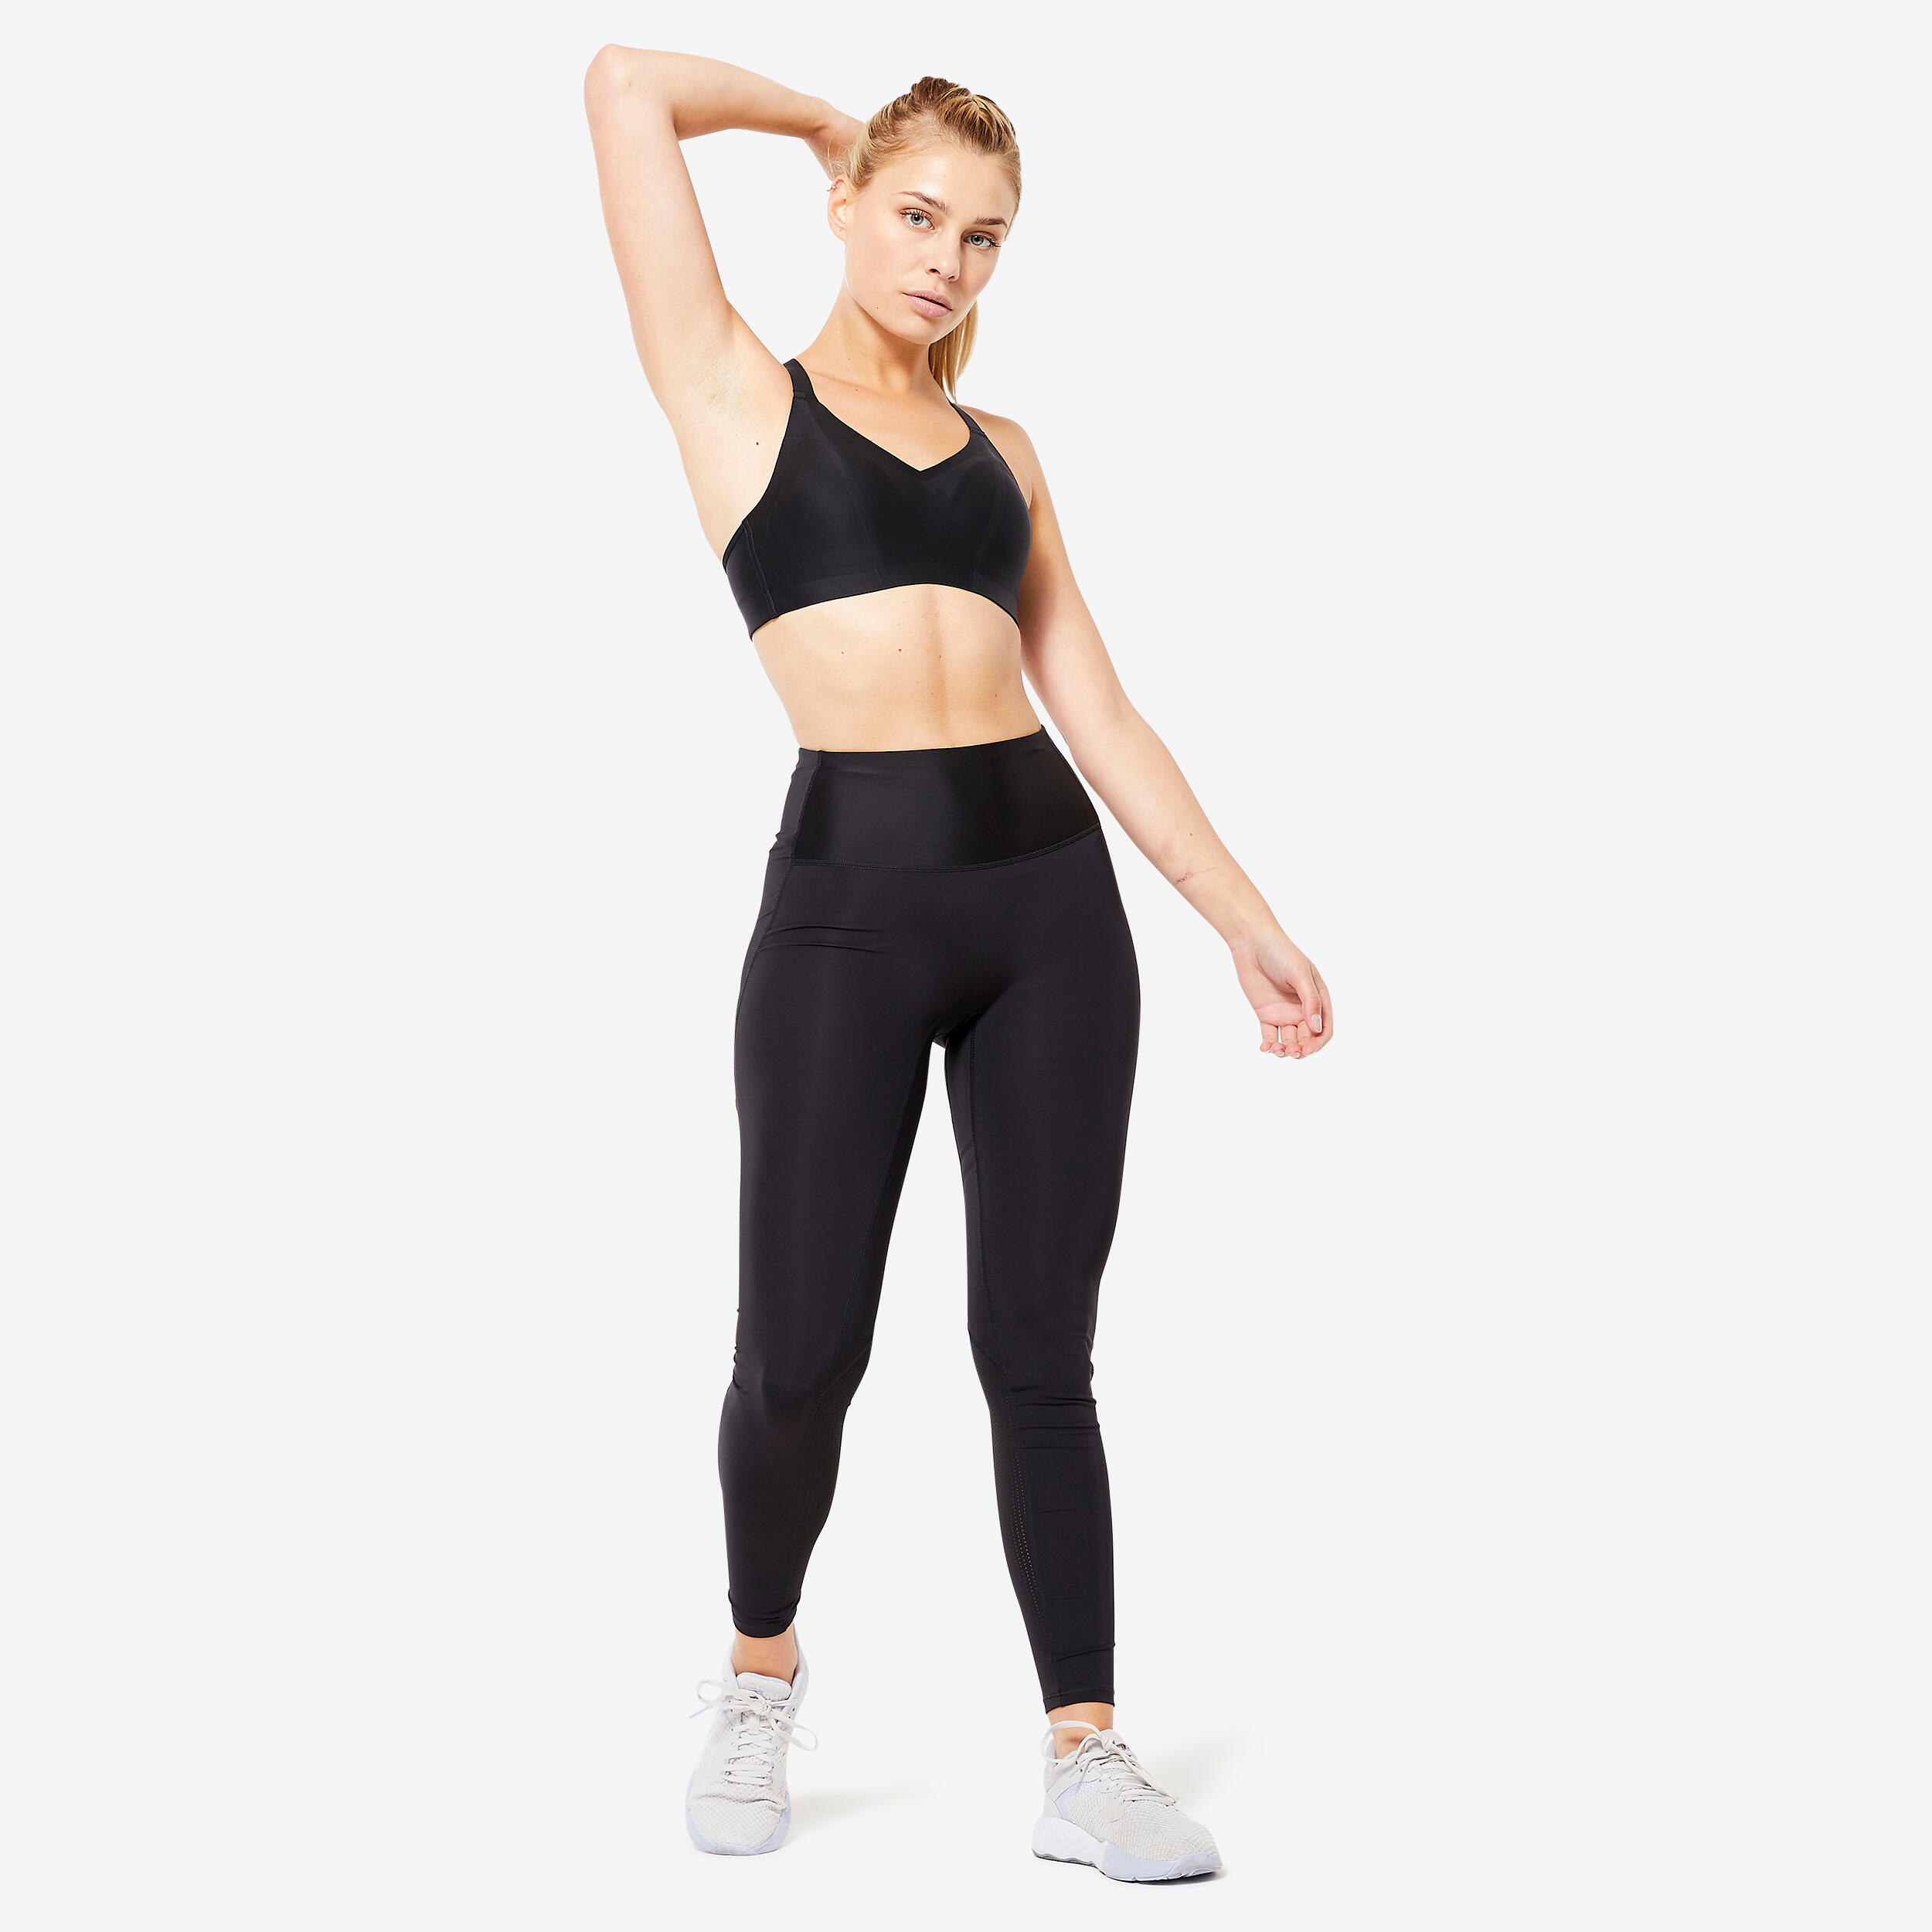 Women's invisible sports bra with high-support cups - Black 2/5